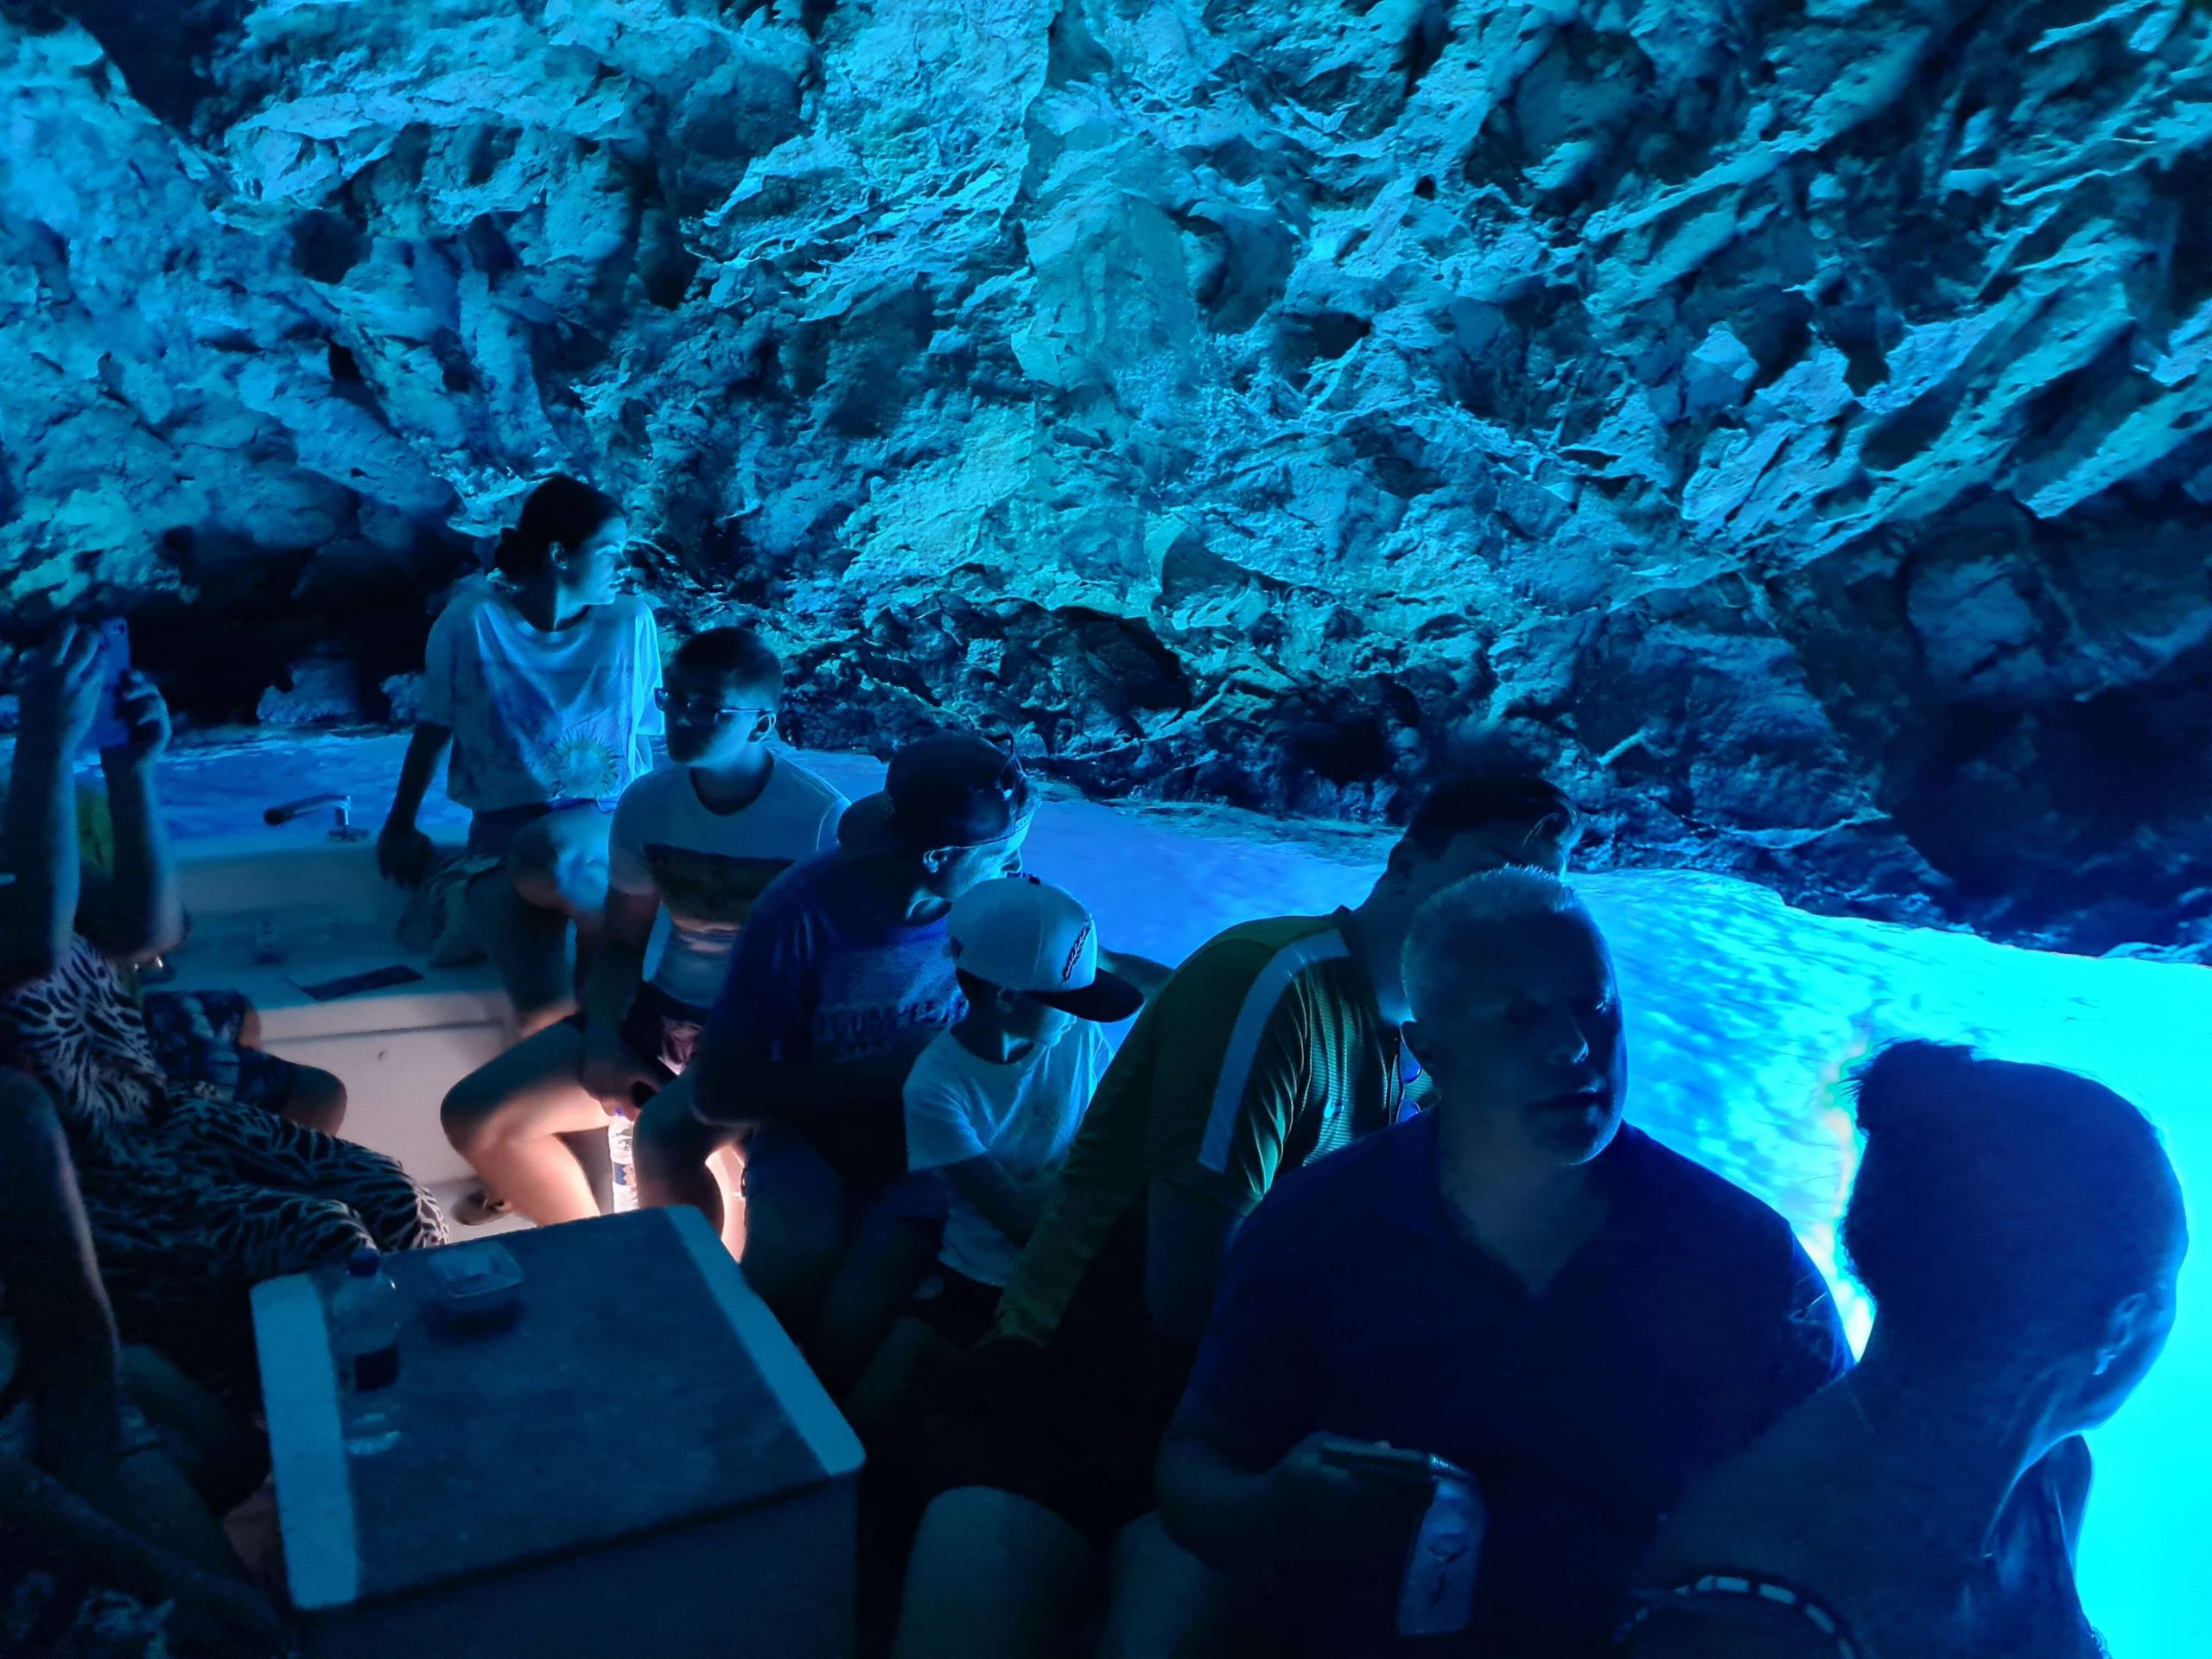 Interier of the Blue Cave